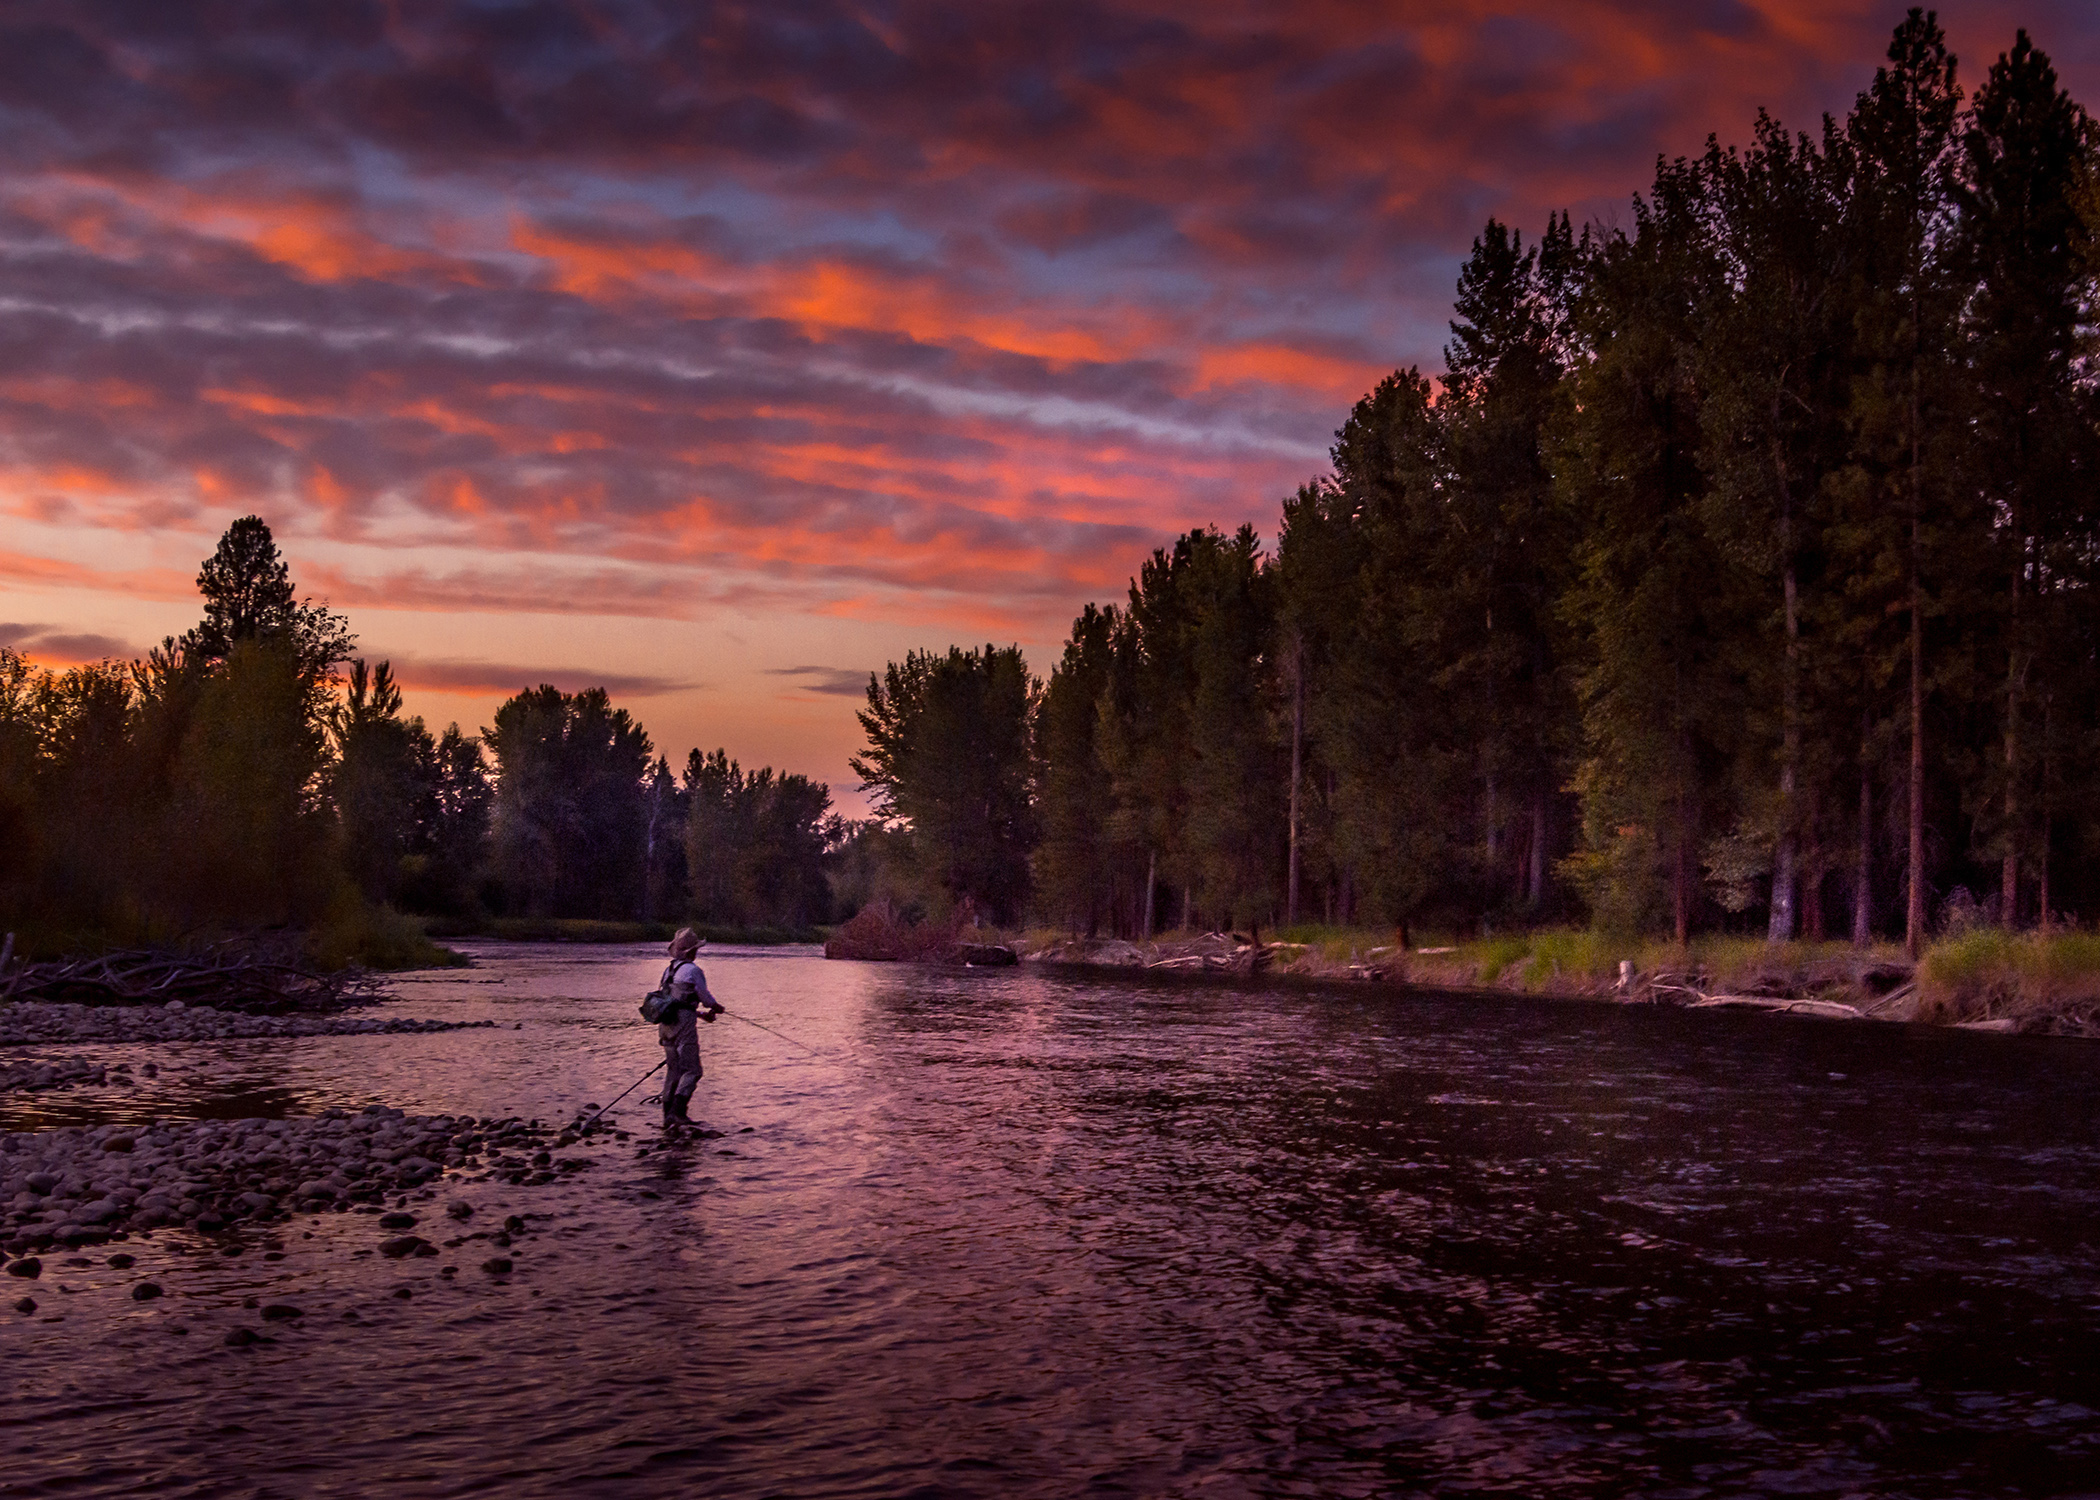 Fly fisherman casting in the river.